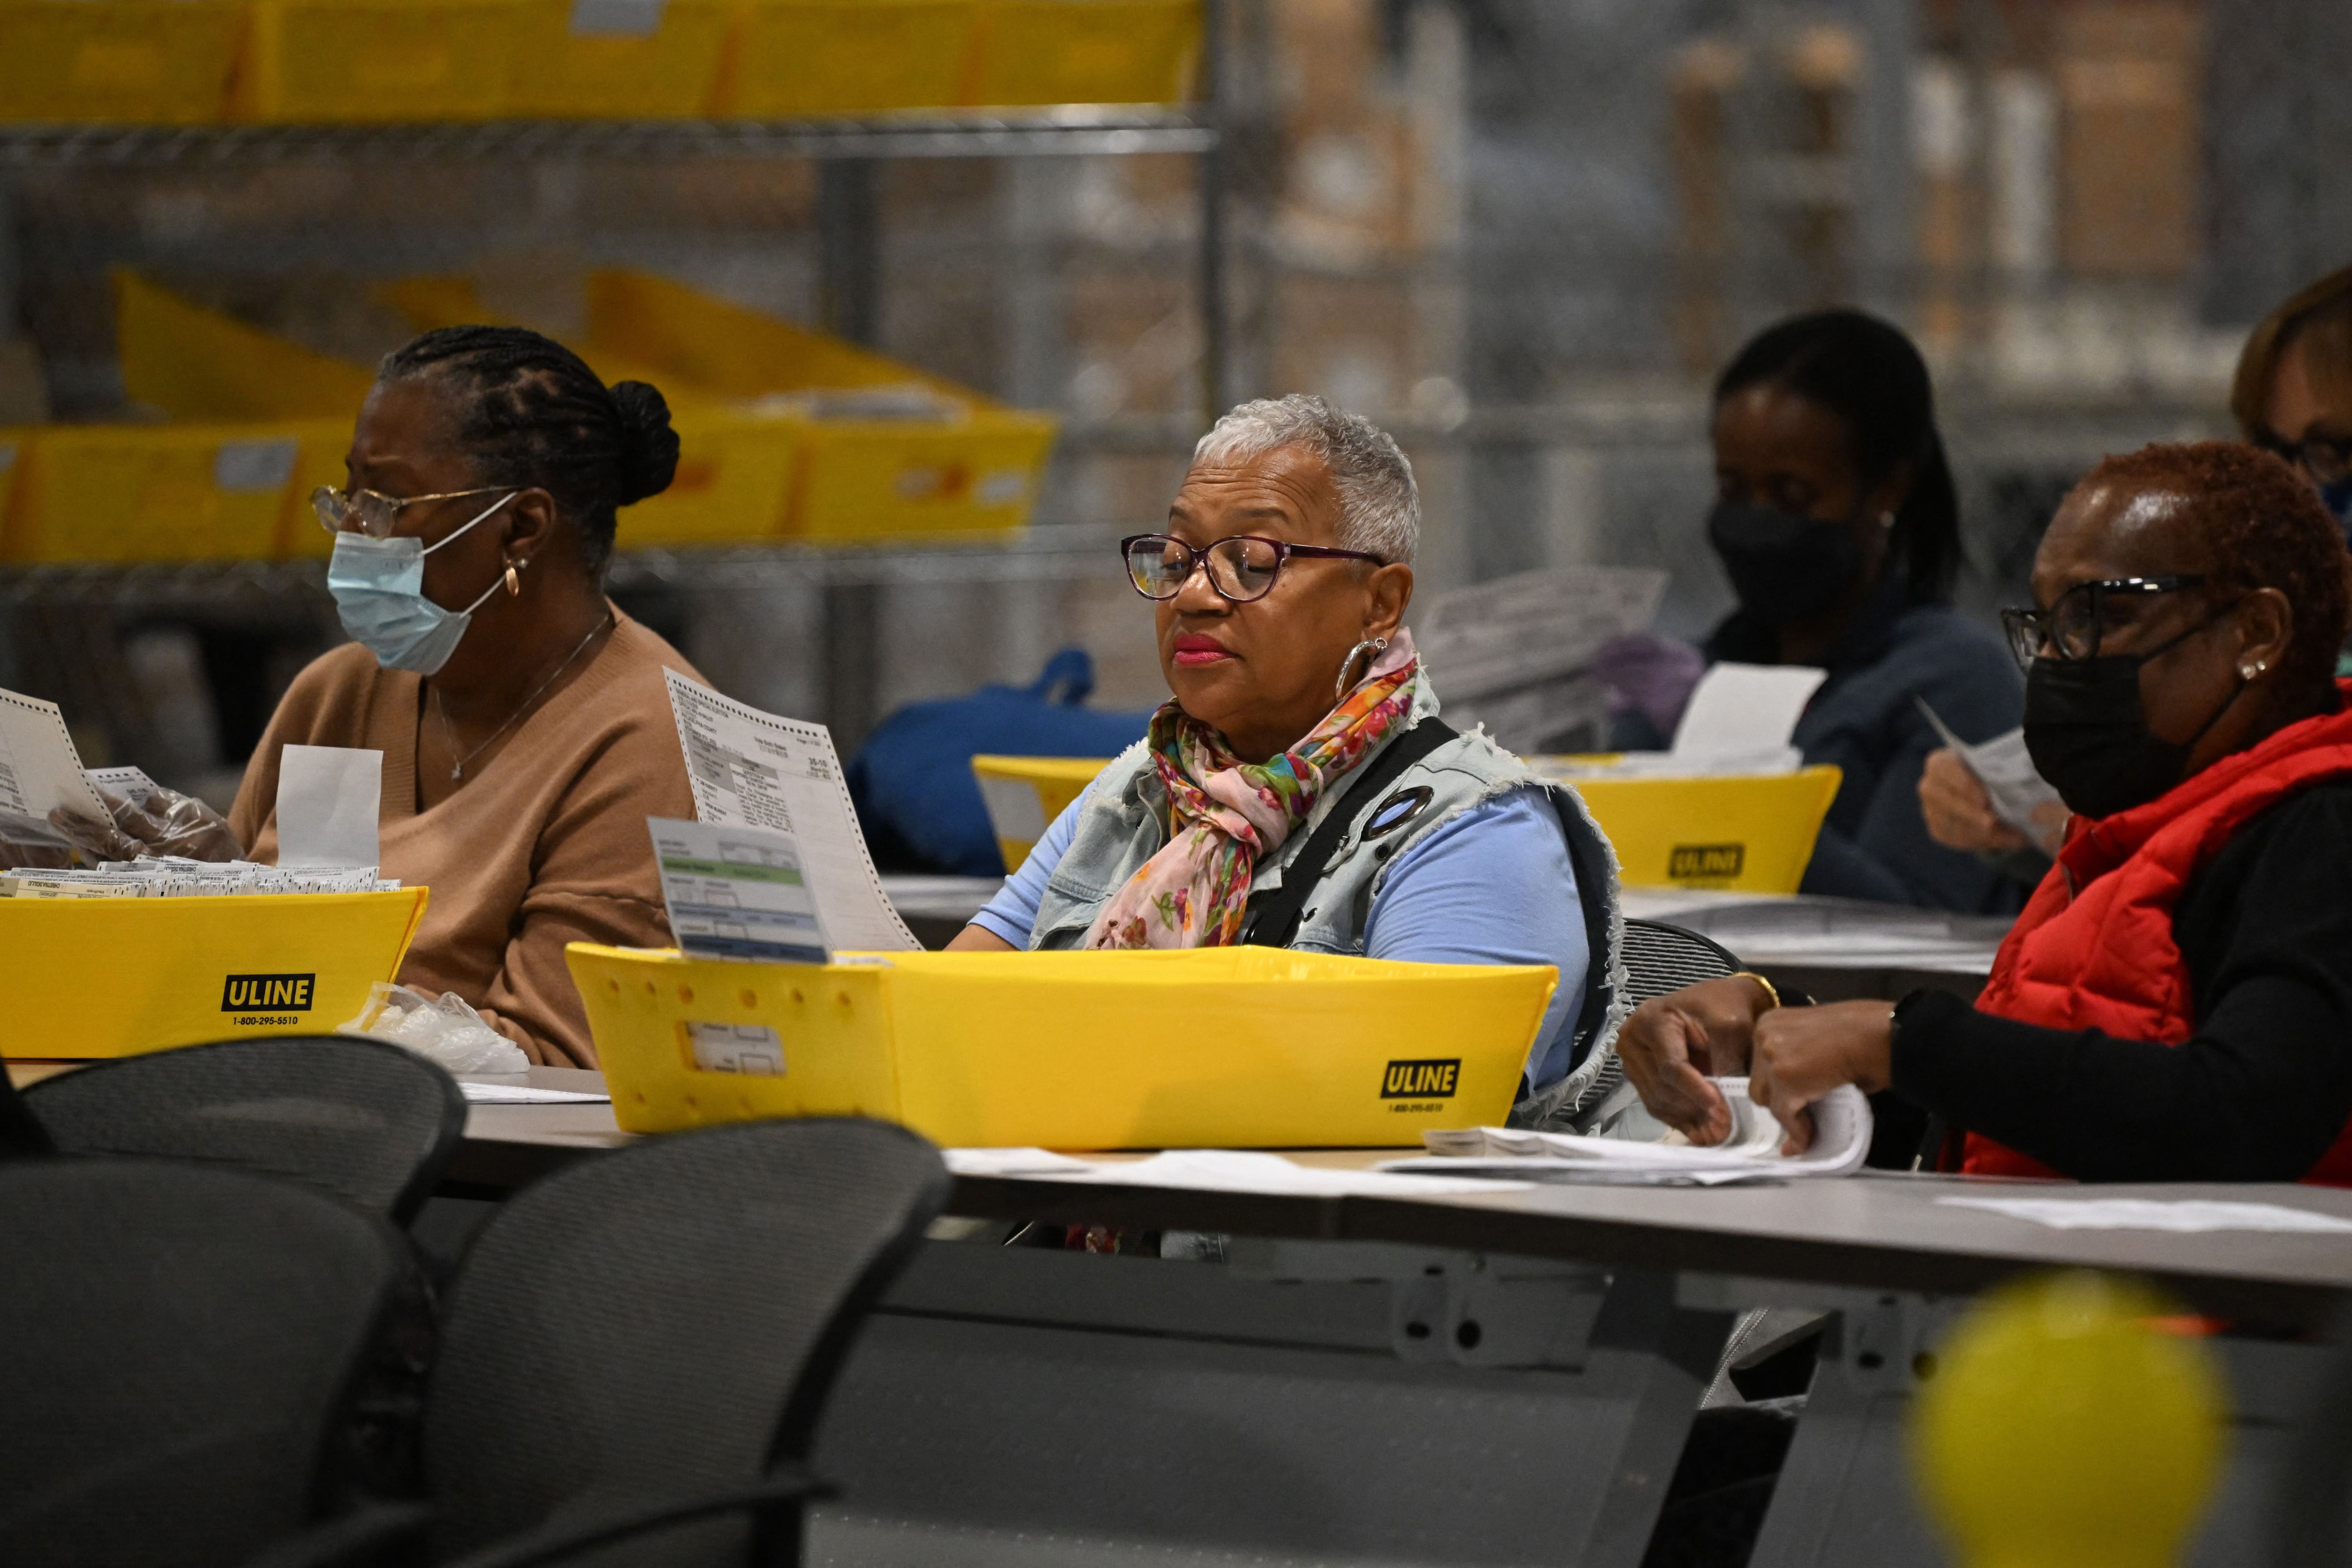 A woman with a scarf and glasses sits with other women processing ballots in a warehouse.